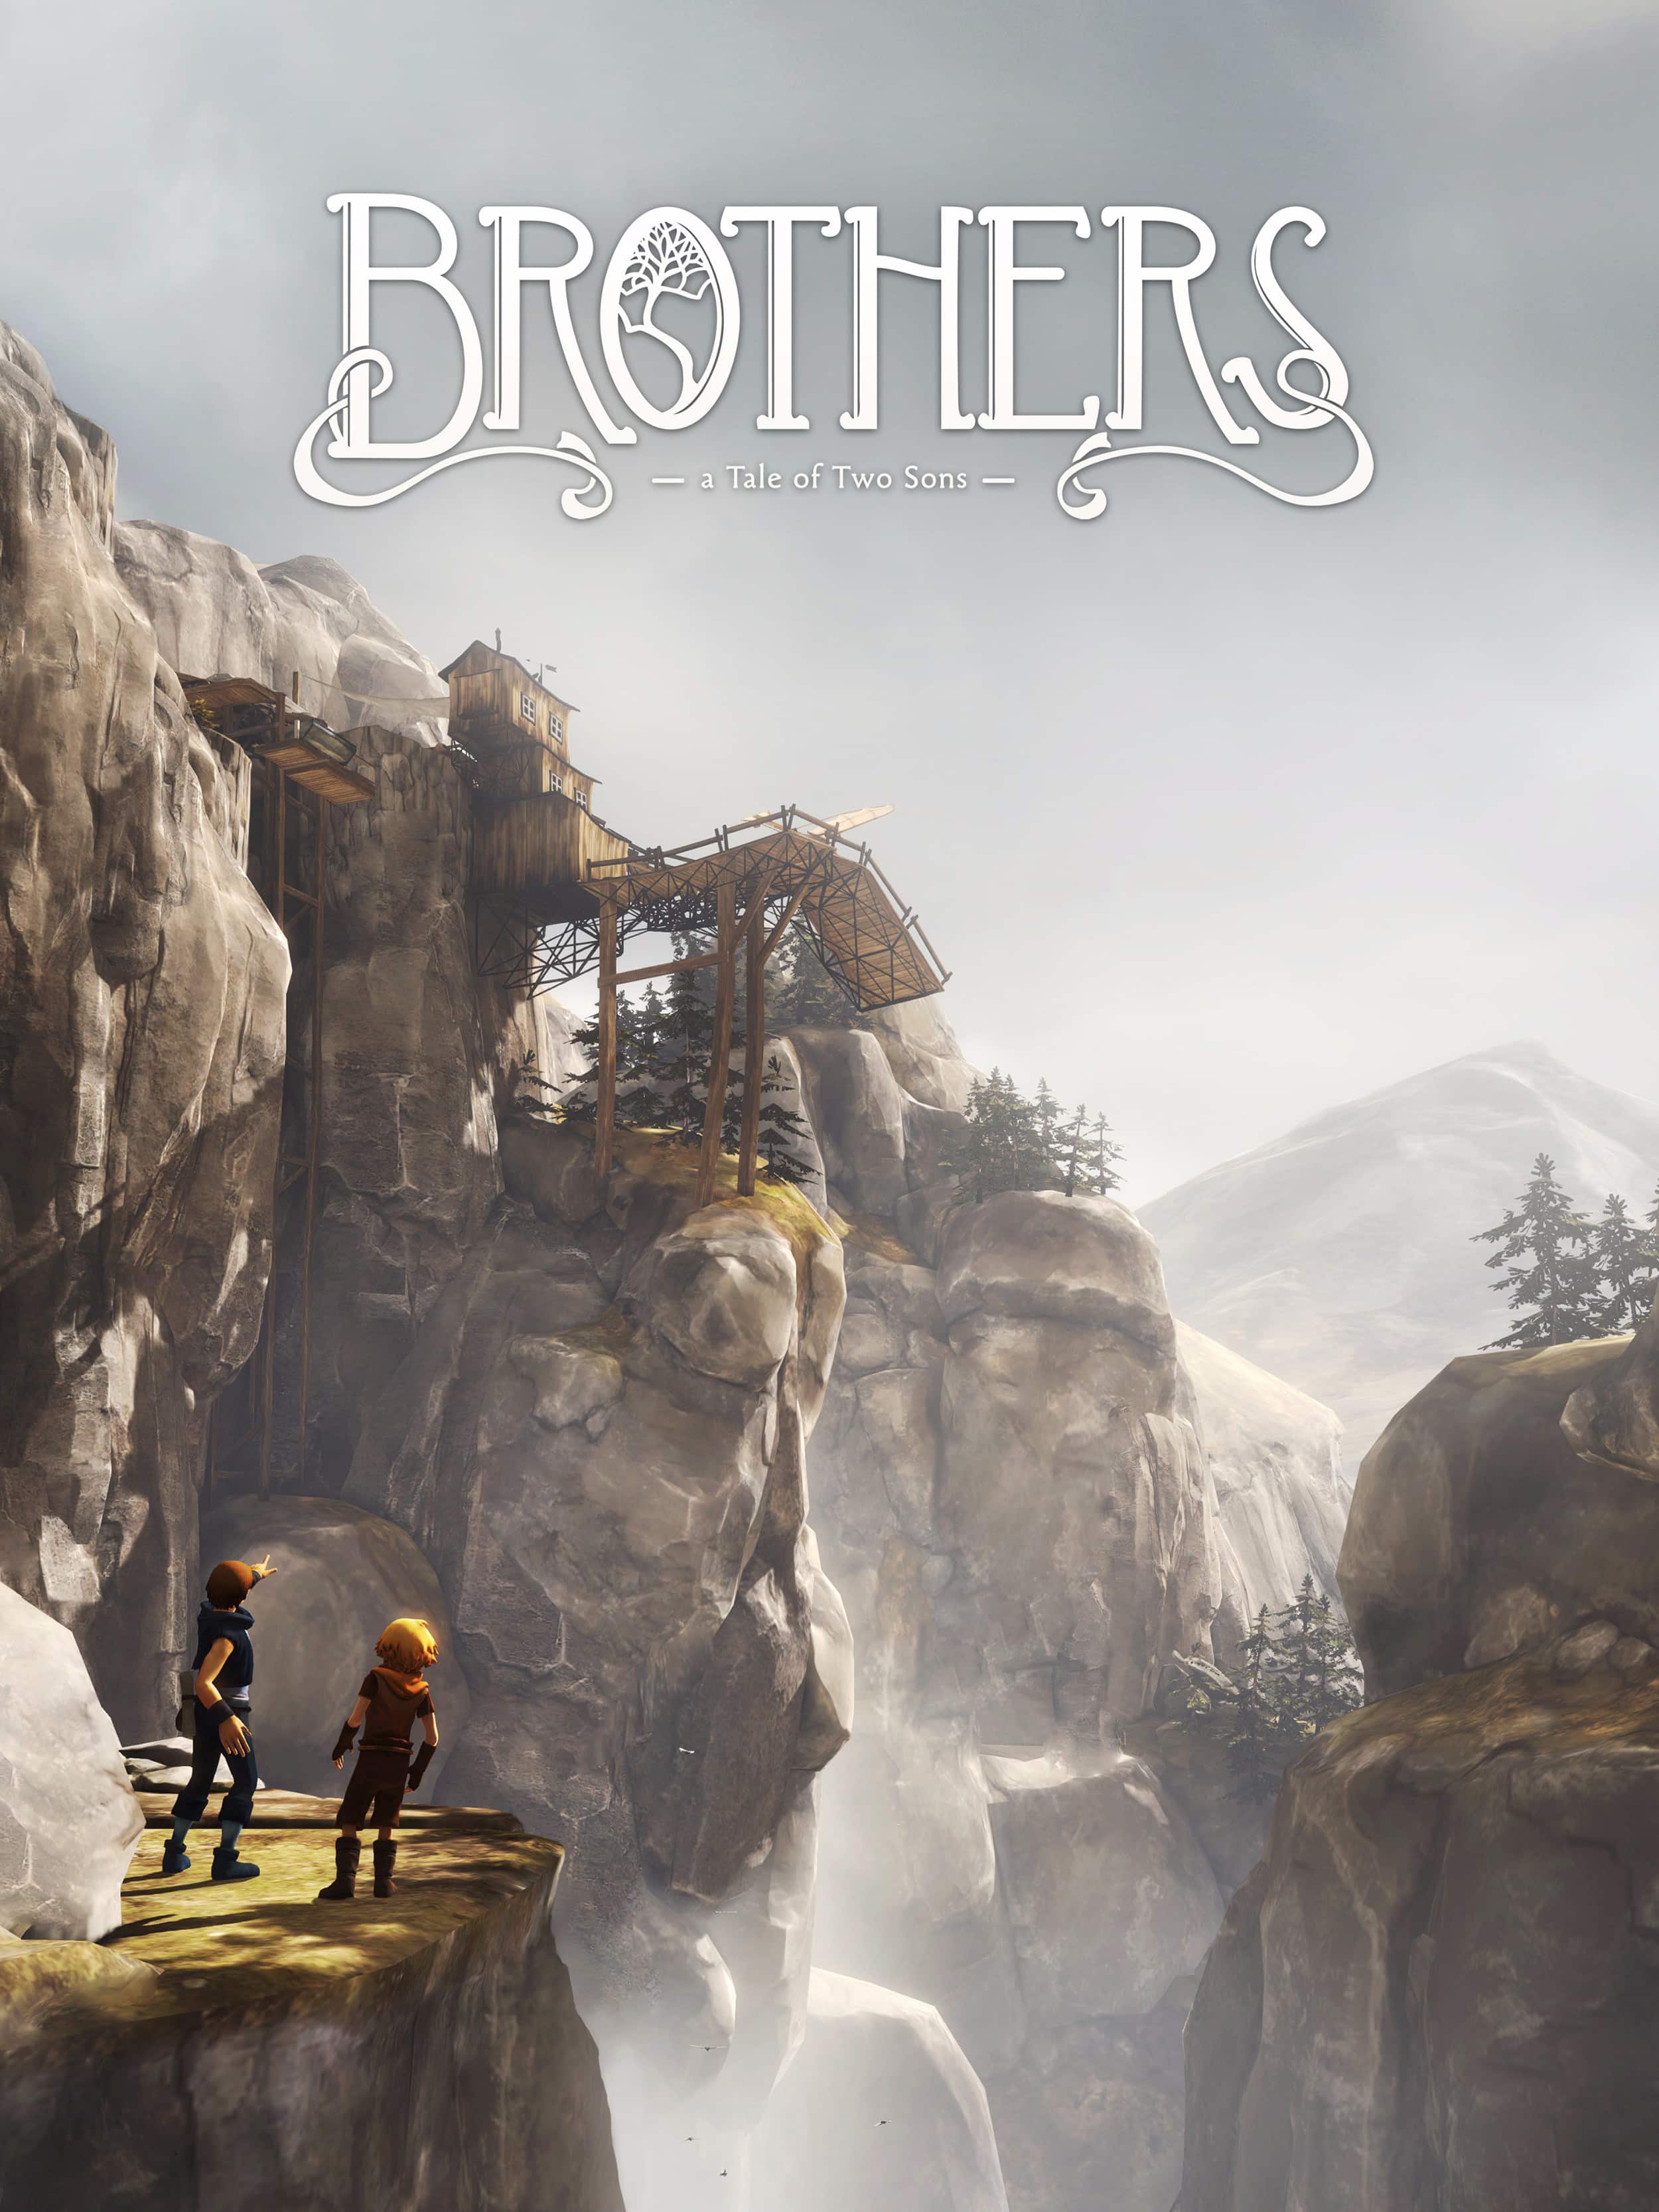 Игра brothers a Tale of two sons. Brothers: a Tale of two sons обложка. Brothers Tale ps4. Brothers a Tale of two sons ps4. Two brothers ps4